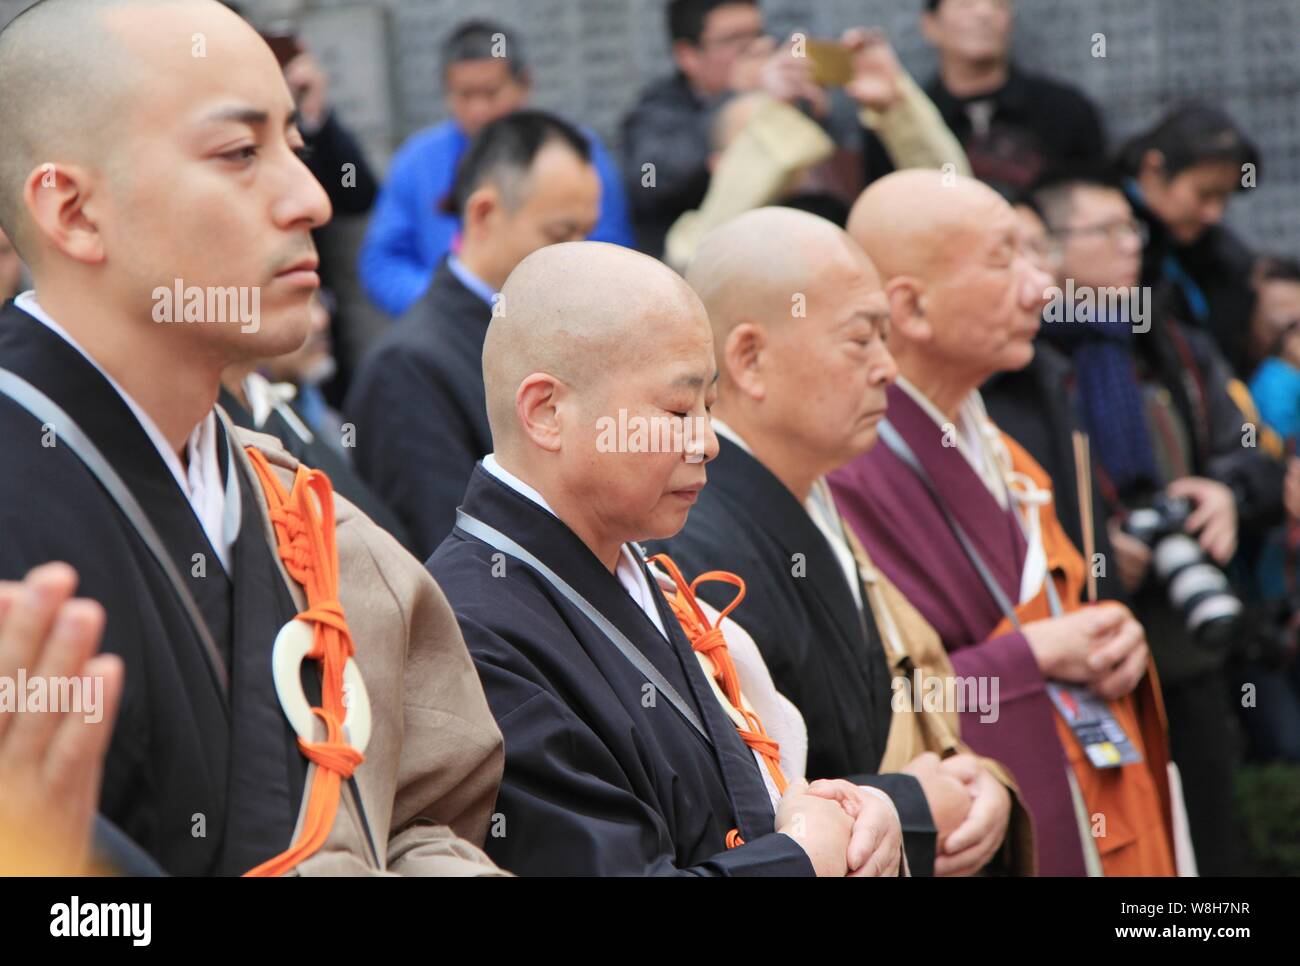 Chinese and foreign monks observe a moment of silence during a memorial to mourn for the victims of the Nanjing Massacre at the Museum of Victims in N Stock Photo